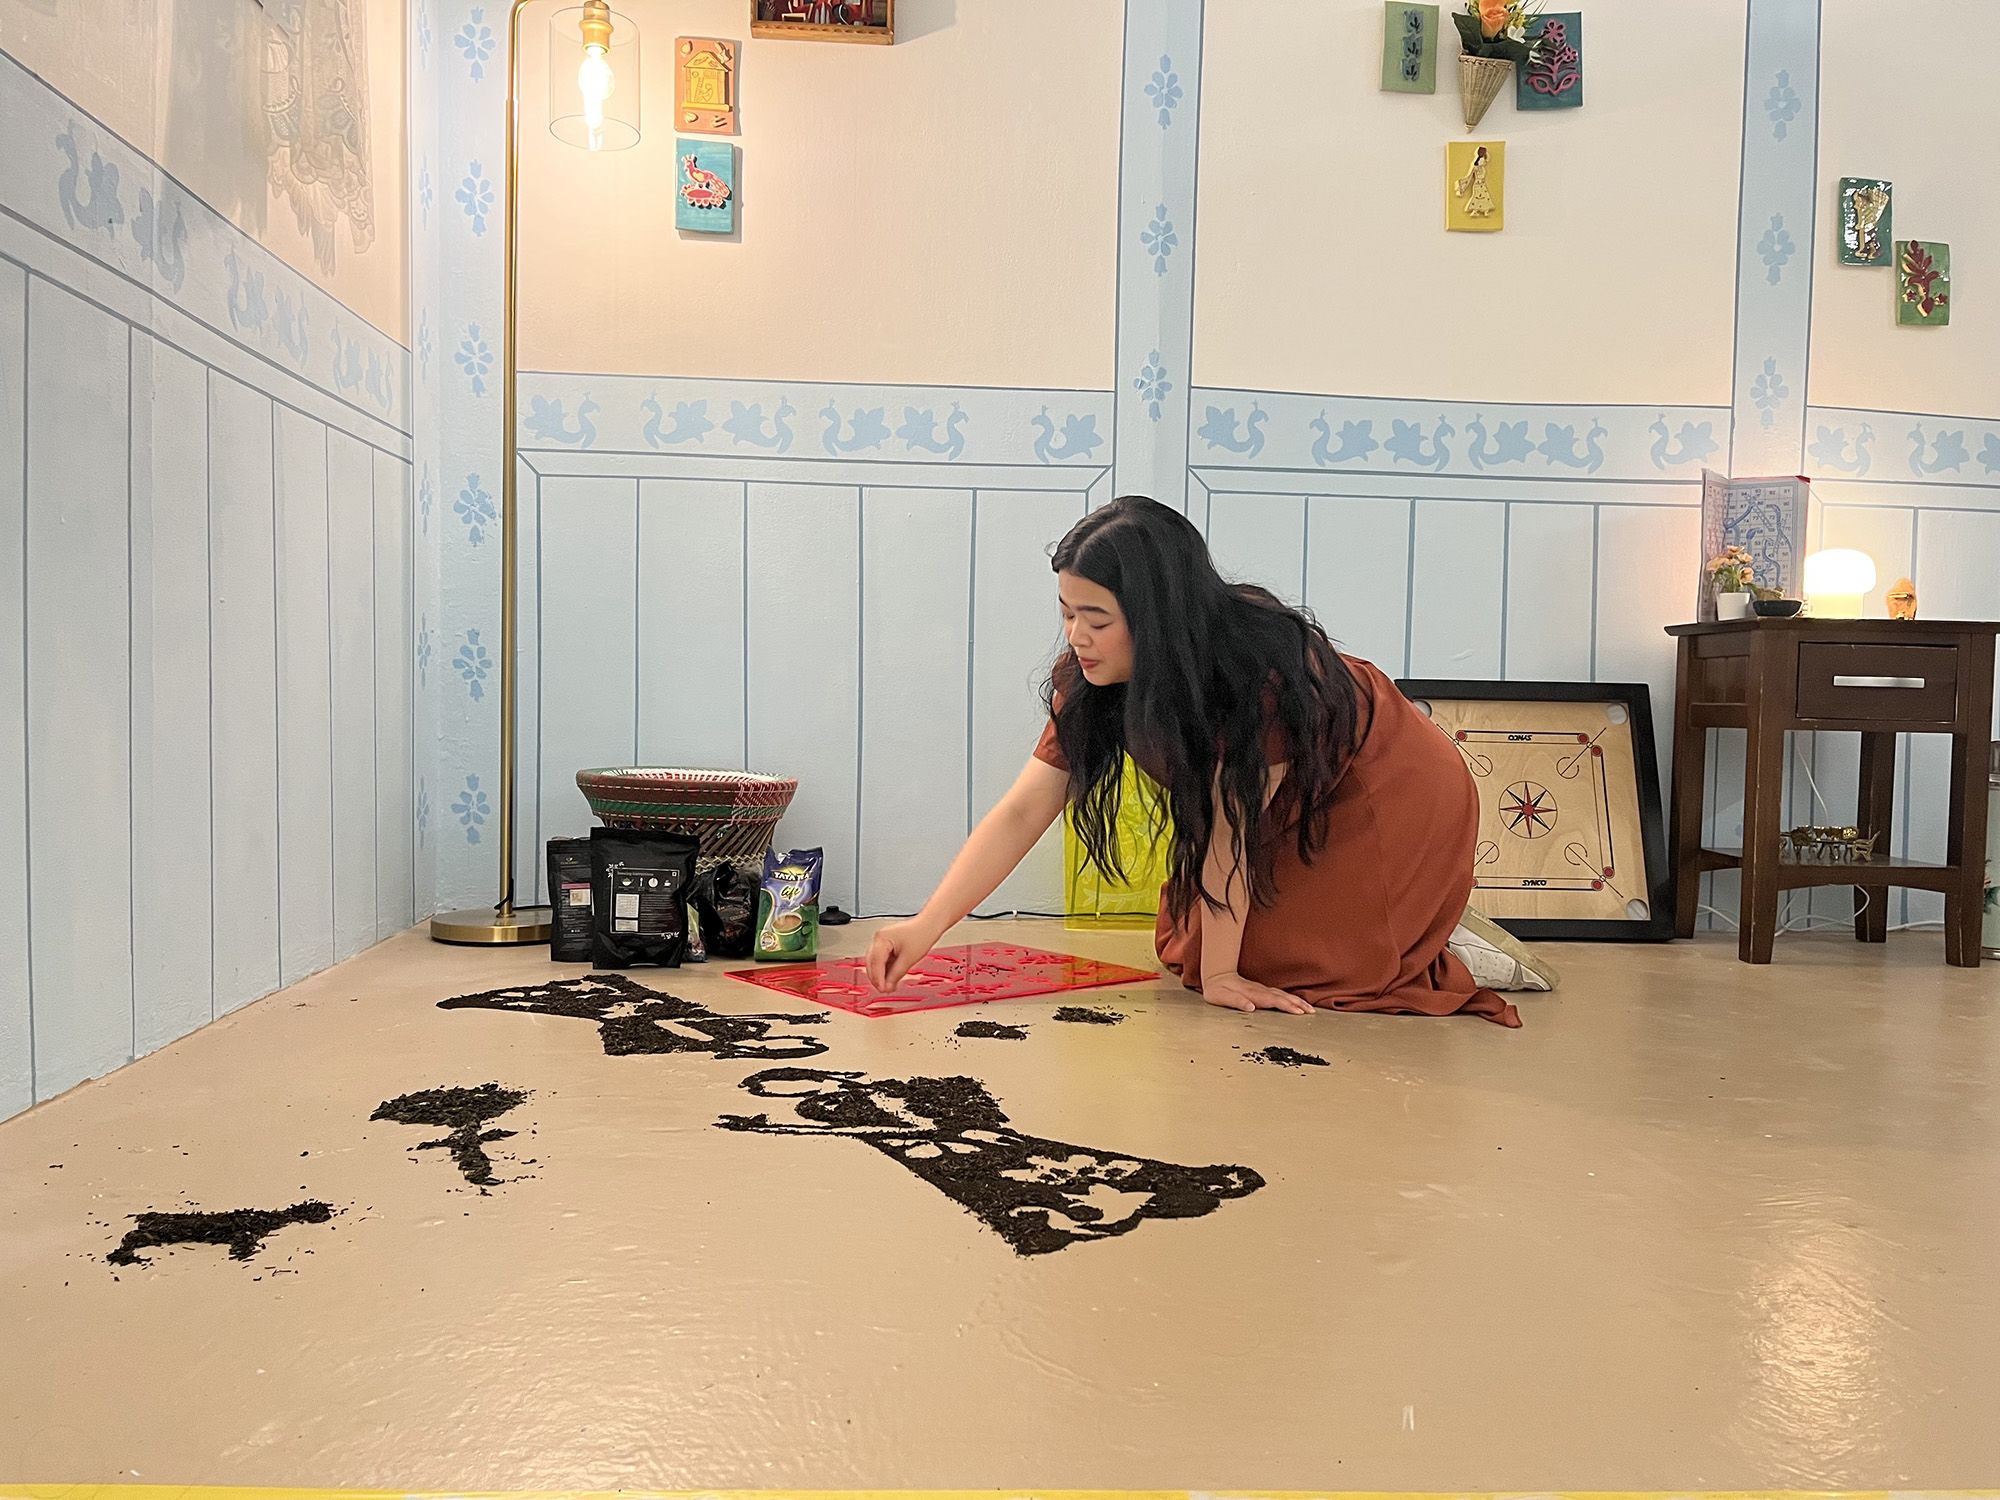 Synchar is on her hands and knees within her installation, on the floor is a red stencil, and shapes made with tea powder. Synchar holds her hand above the stencil and sprinkling tea powder.  